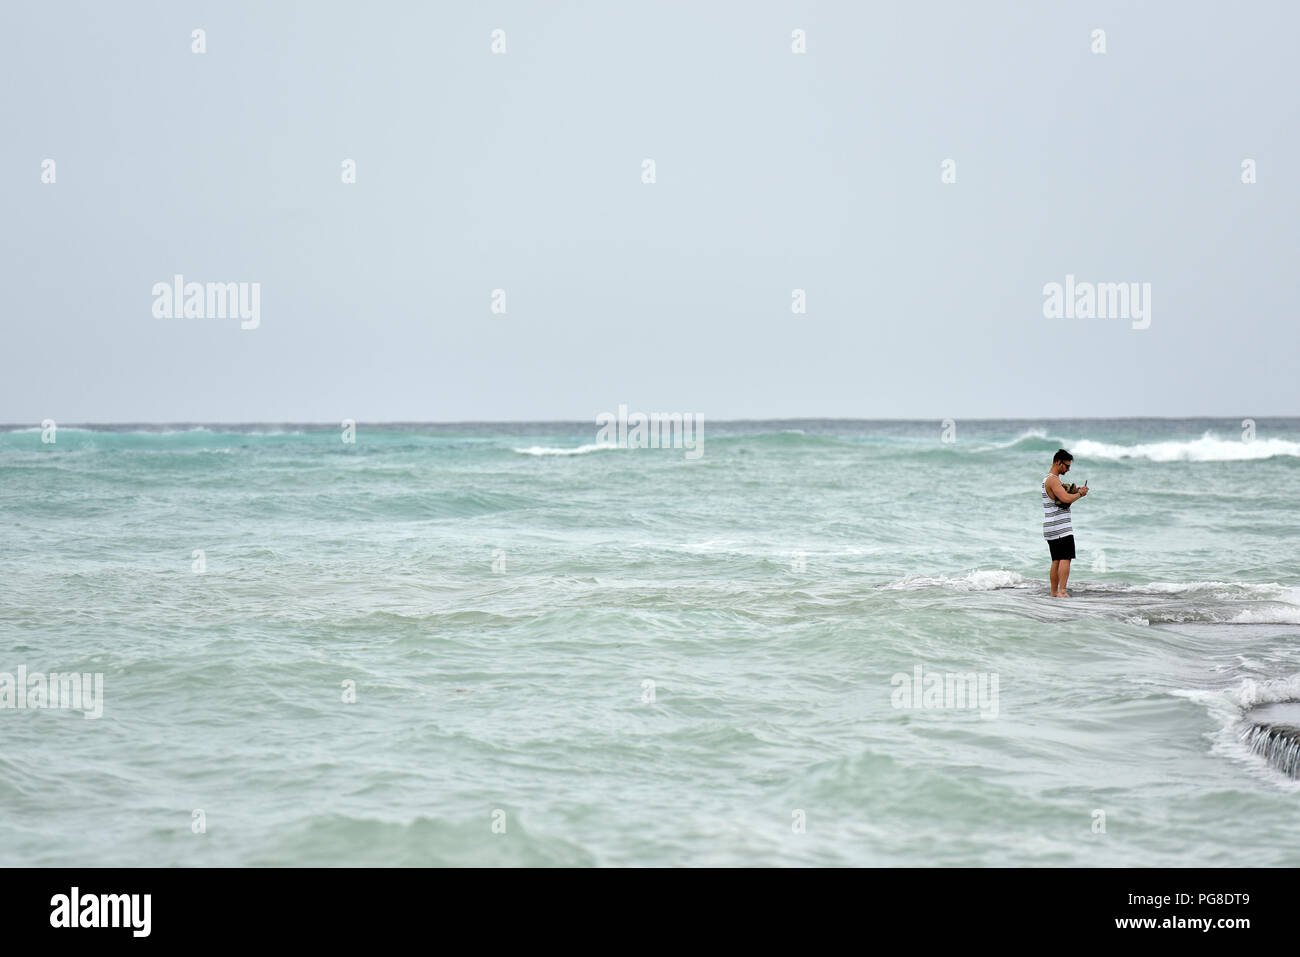 Honolulu, USA. 23rd Aug, 2018. A man takes pictures on the seawall at Waikiki beach in Honolulu of Hawaii, the United States, Aug. 23, 2018. Hurricane Lane, predicted as the biggest weather threat to Hawaii in decades, moved perilously close to the Aloha State Thursday morning, triggering heavy rain, landslide and flooding. Credit: Sun Ruibo/Xinhua/Alamy Live News Stock Photo